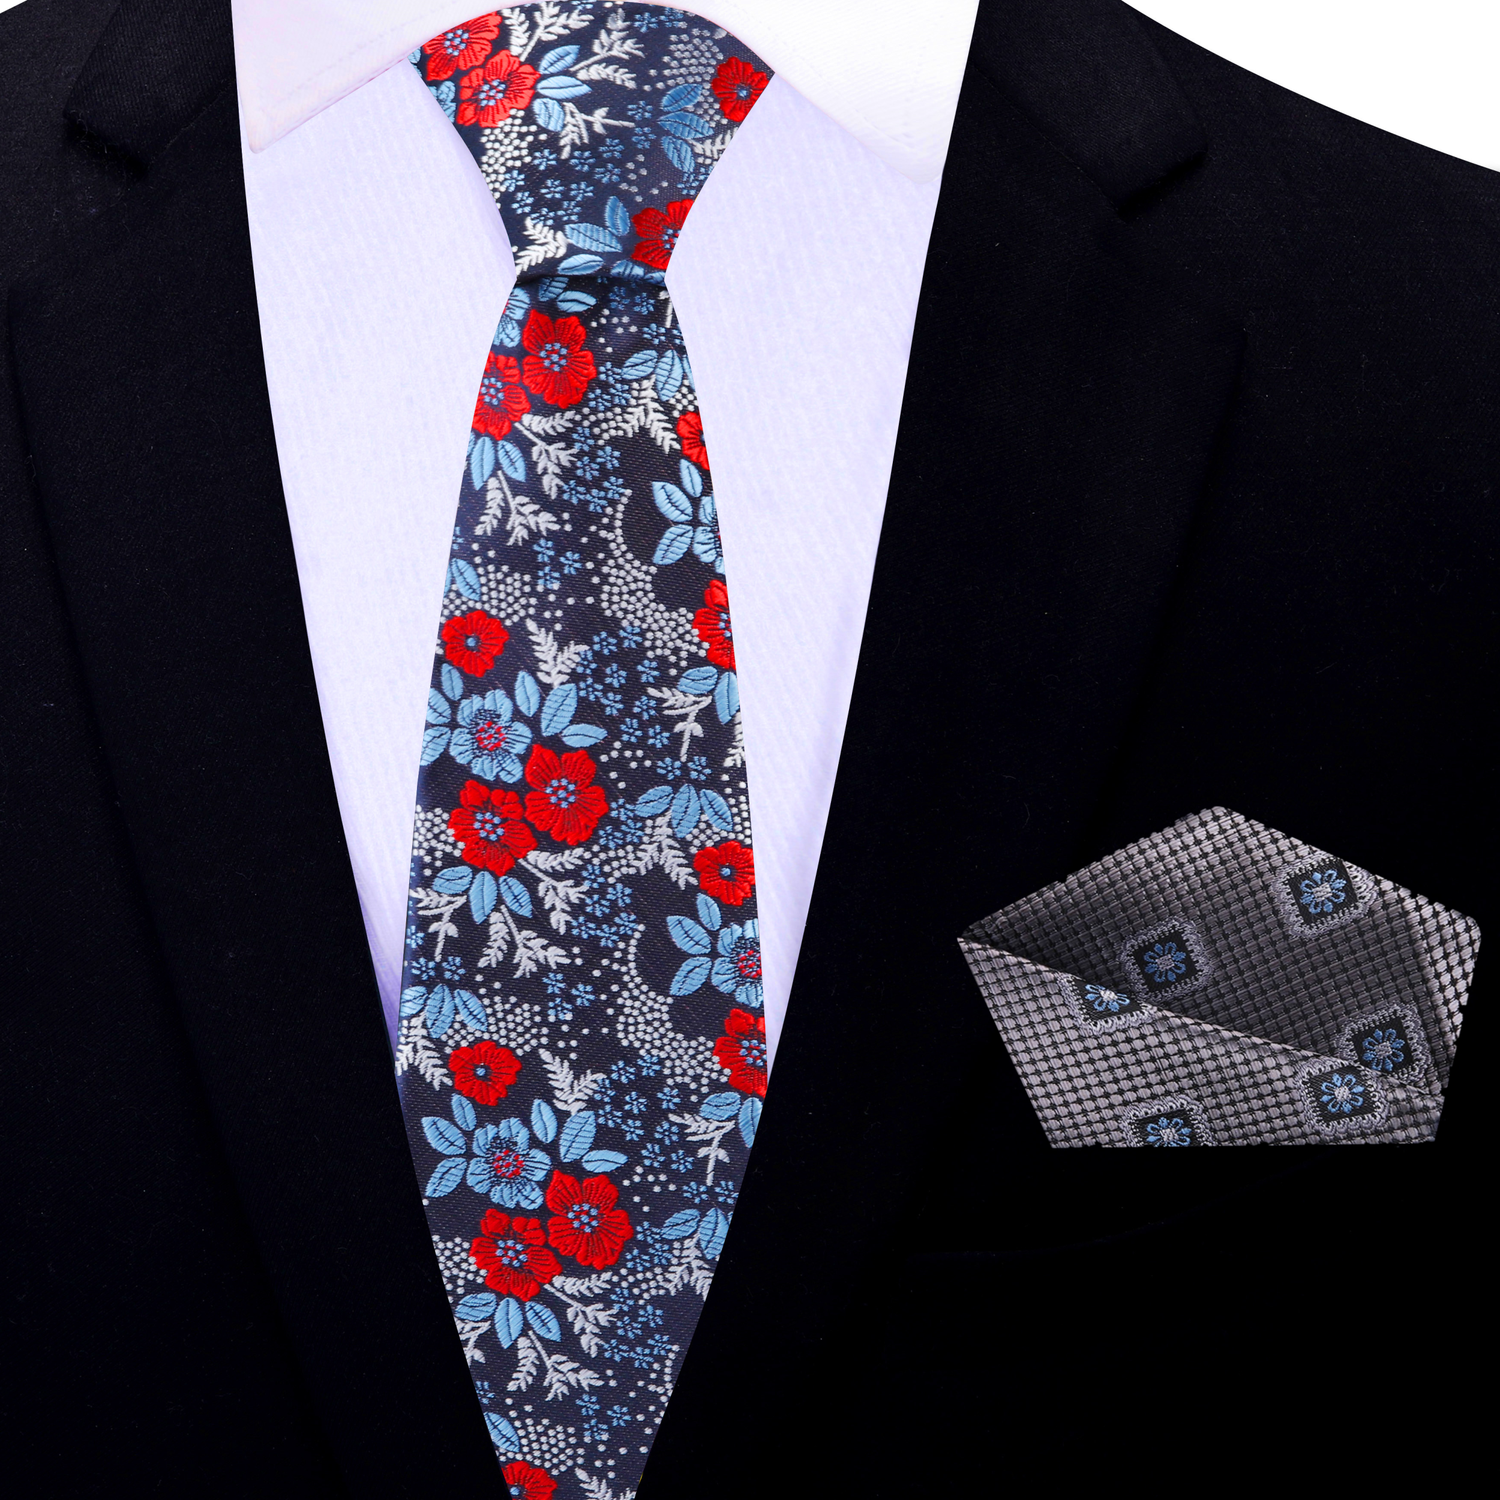 Thin Tie: Blue, Red, Silver Floral Necktie with Accenting Grey, Blue Geometric Square